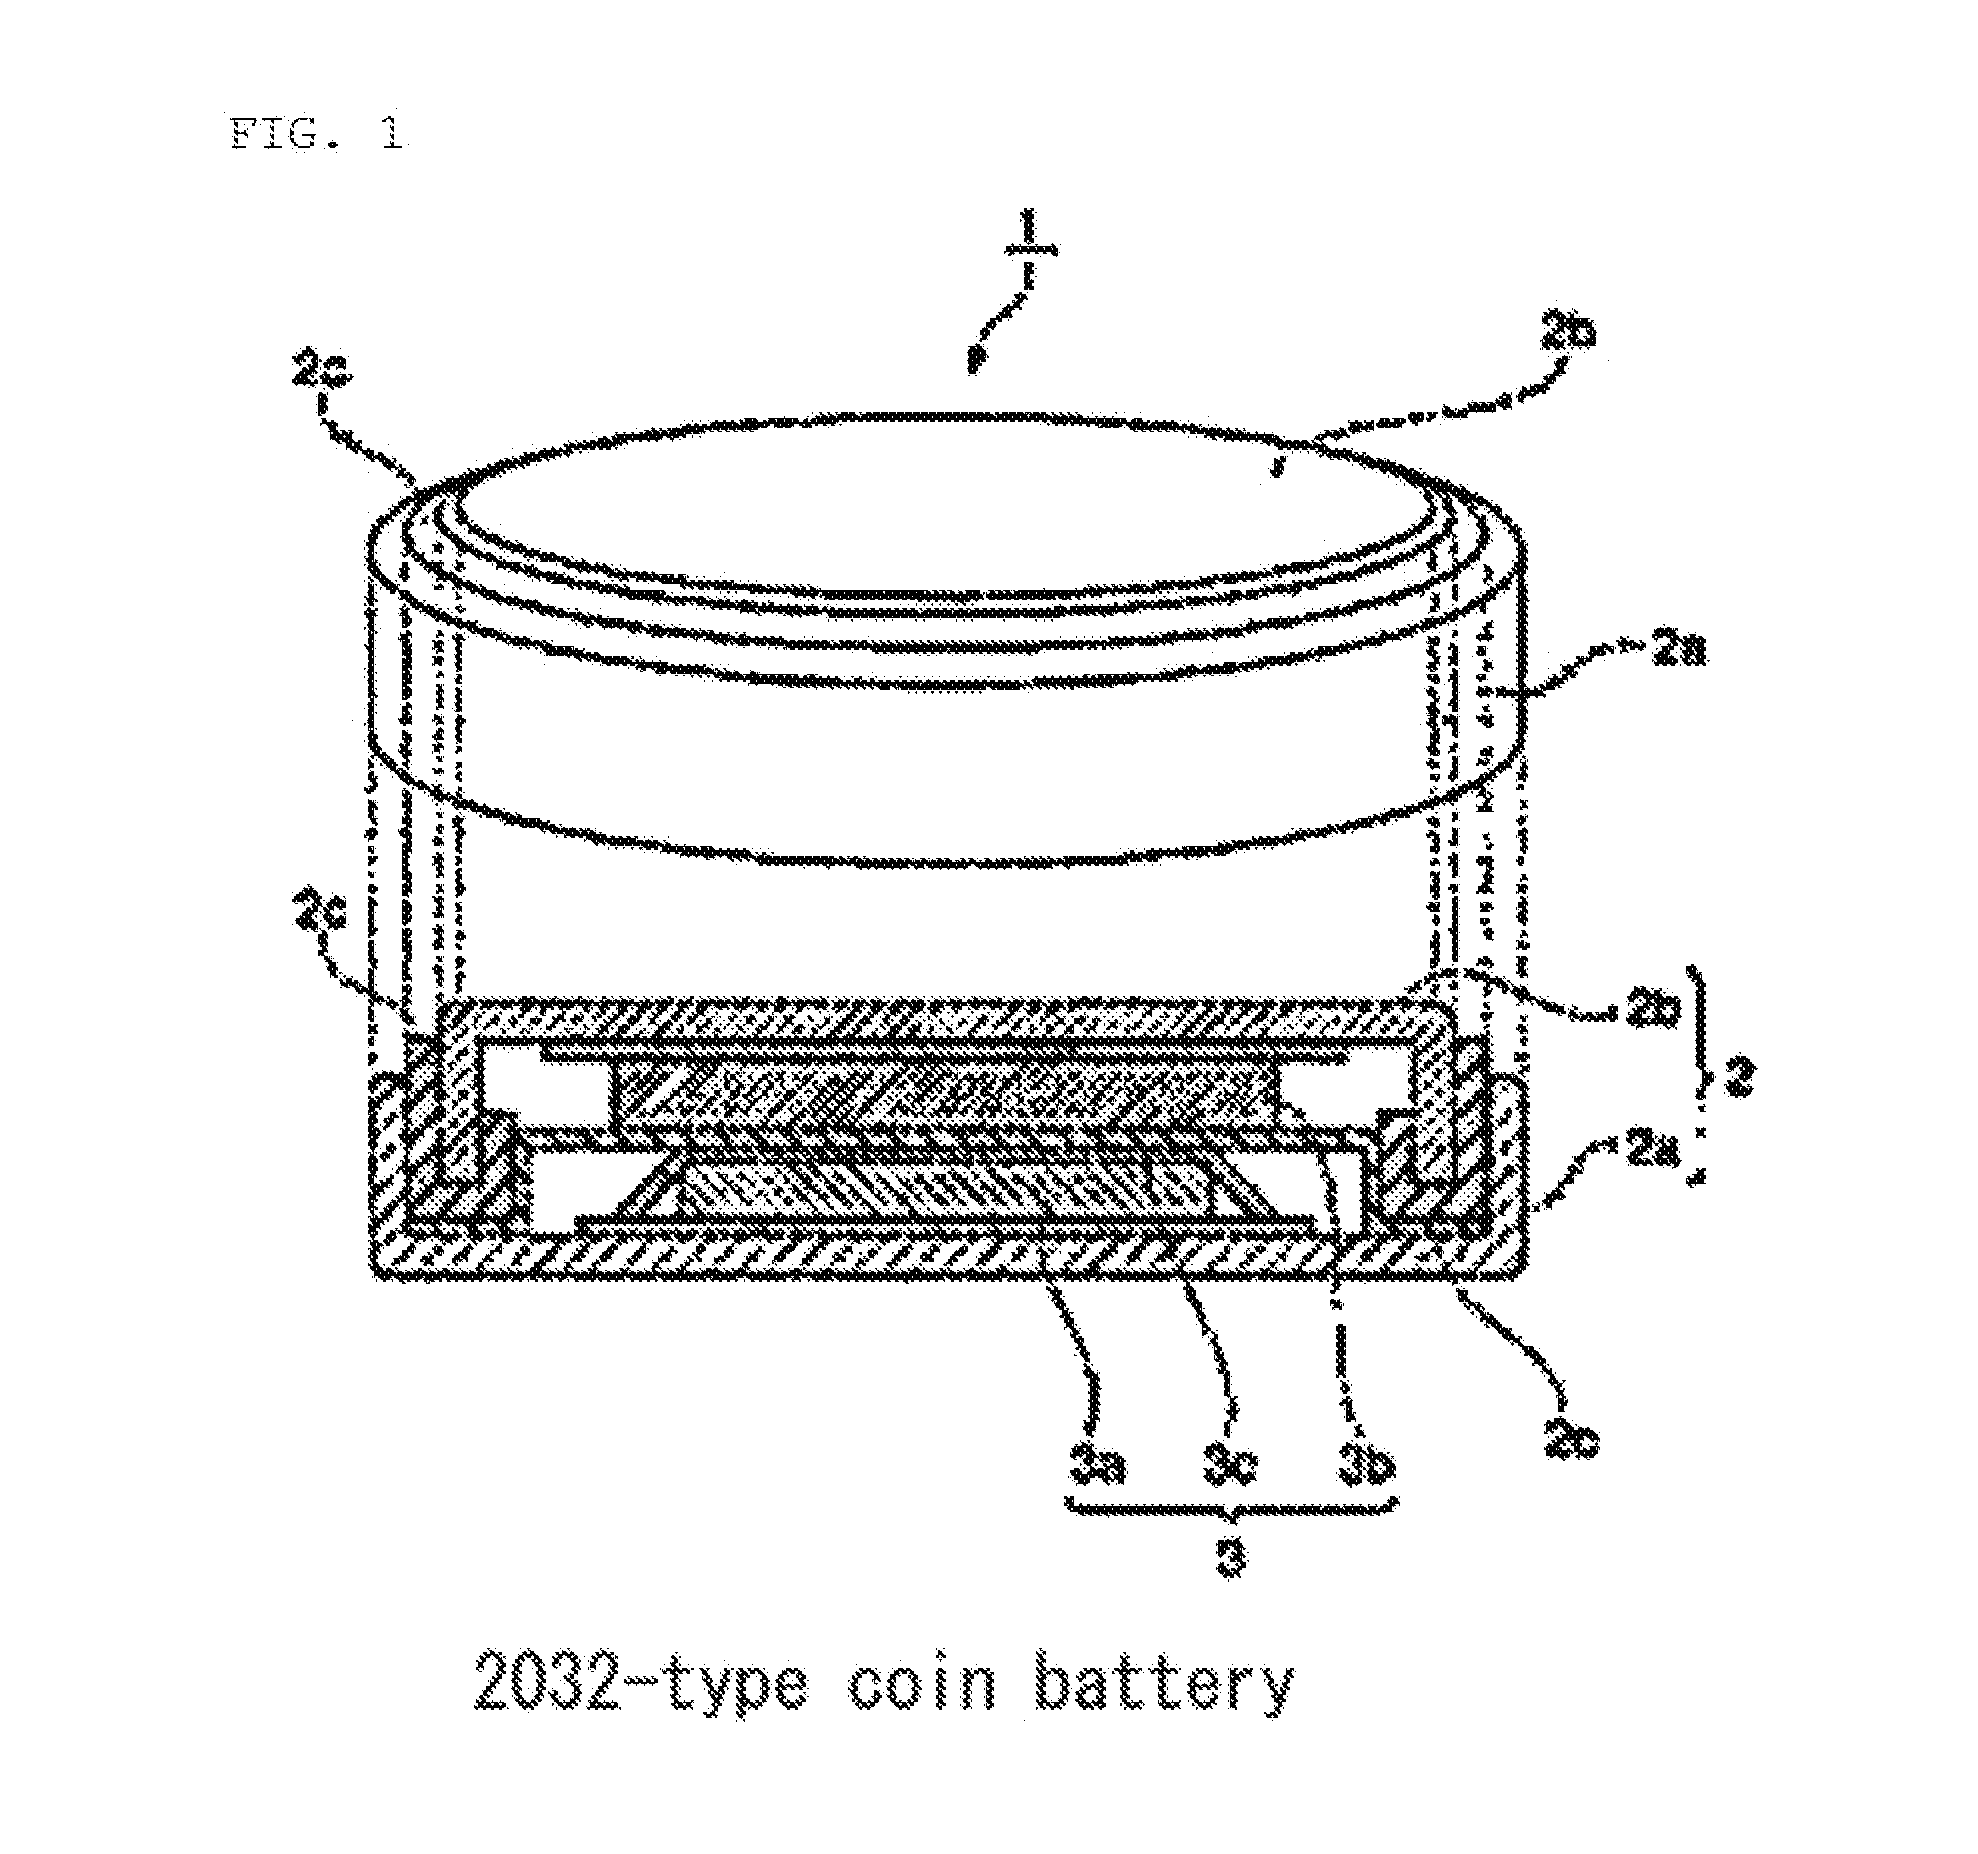 Method for producing positive electrode active material for nonaqueous electrolyte secondary batteries, positive electrode active material for nonaqueous electrolyte secondary batteries, and nonaqueous electrolyte secondary battery